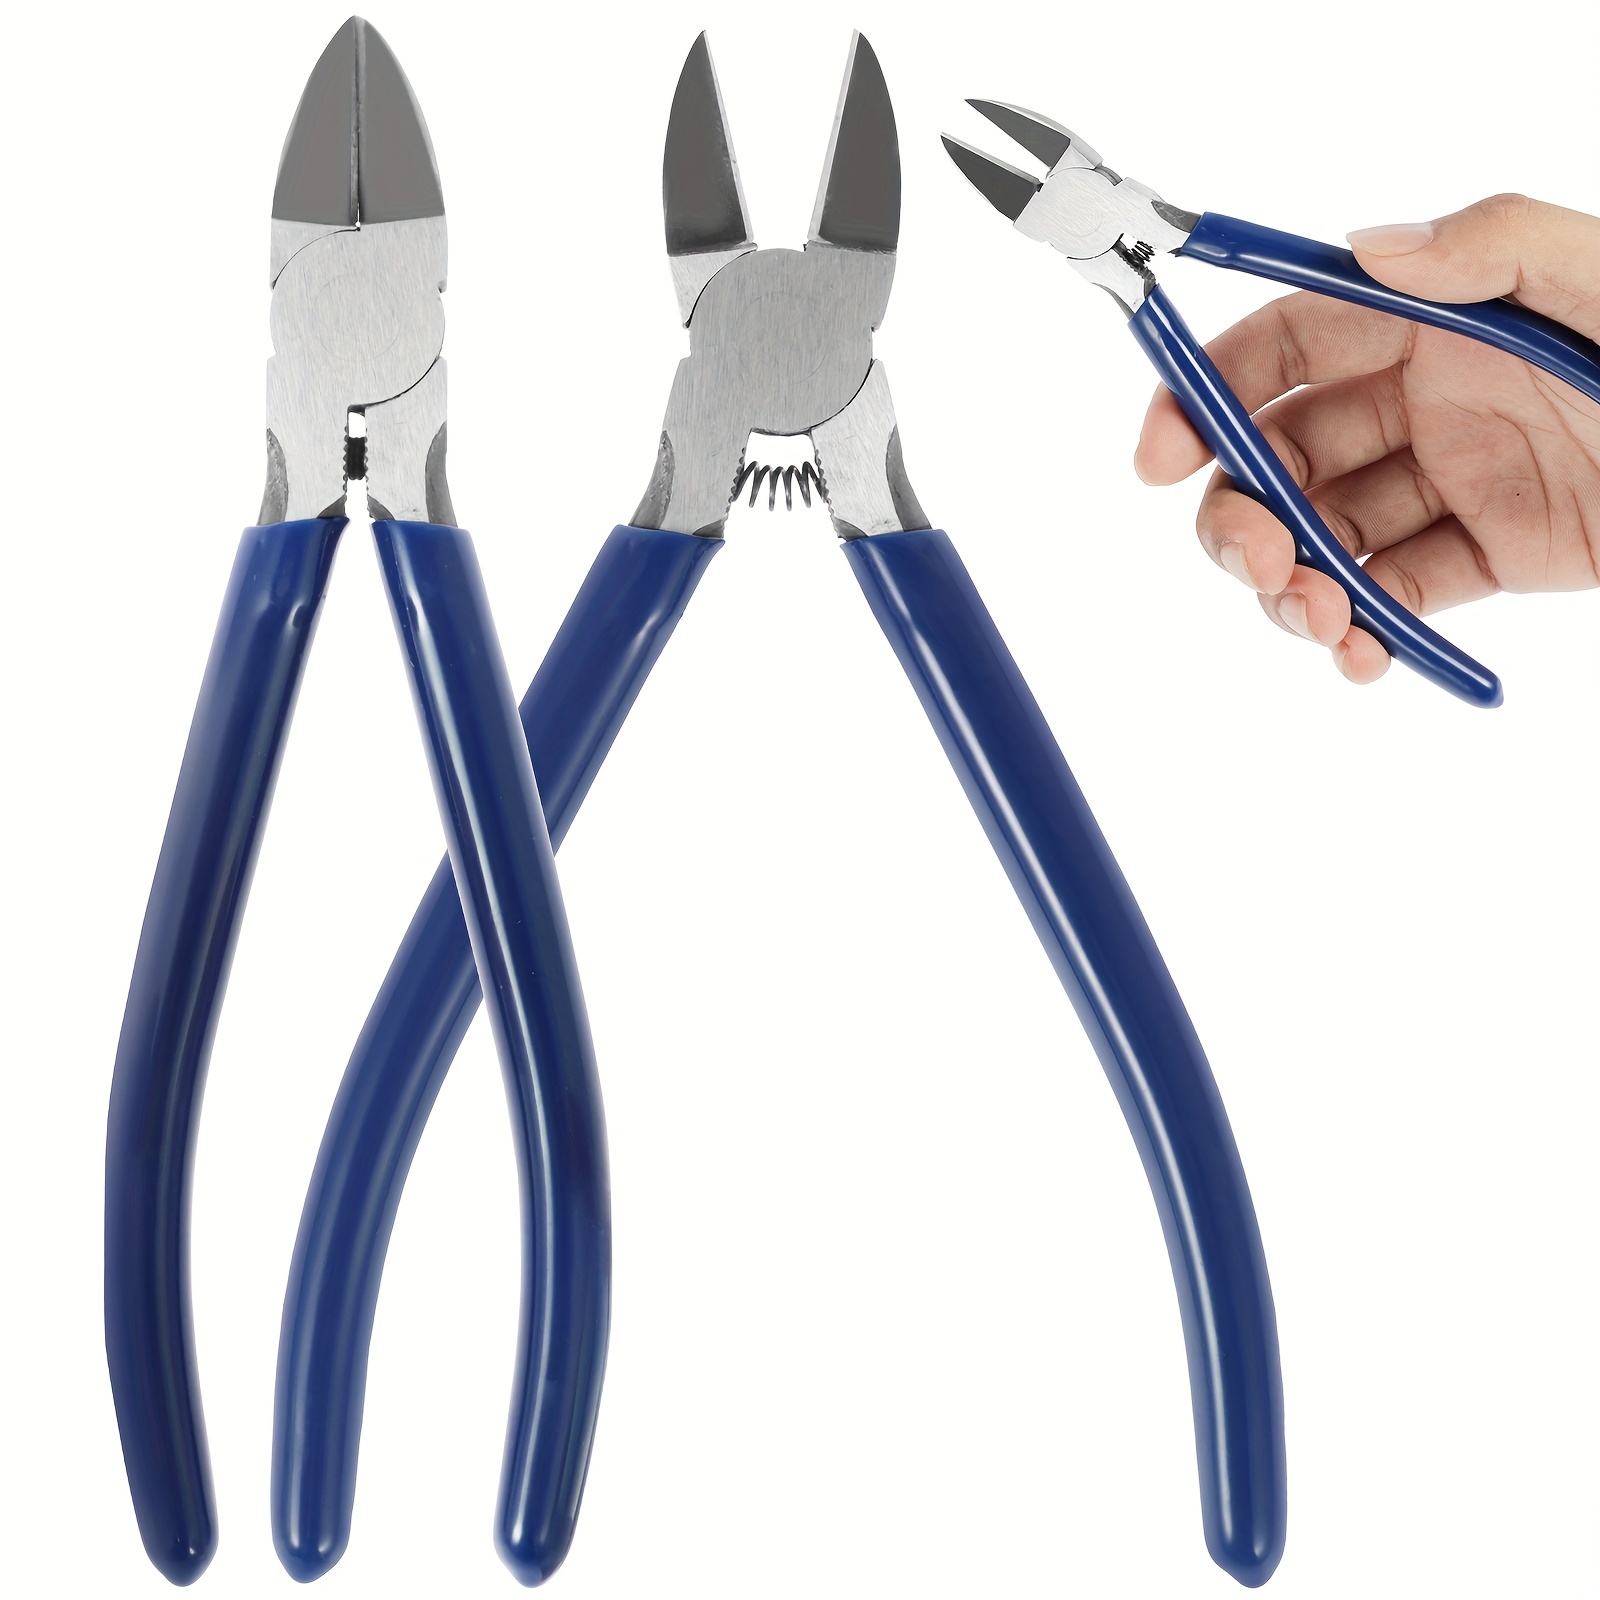 6pcs Side Cutters Flush with Spring,Small Wire Cutters for Jewelry Making,Precision Wire Snips,Side Cutting Pliers,Zip Tie Cutter